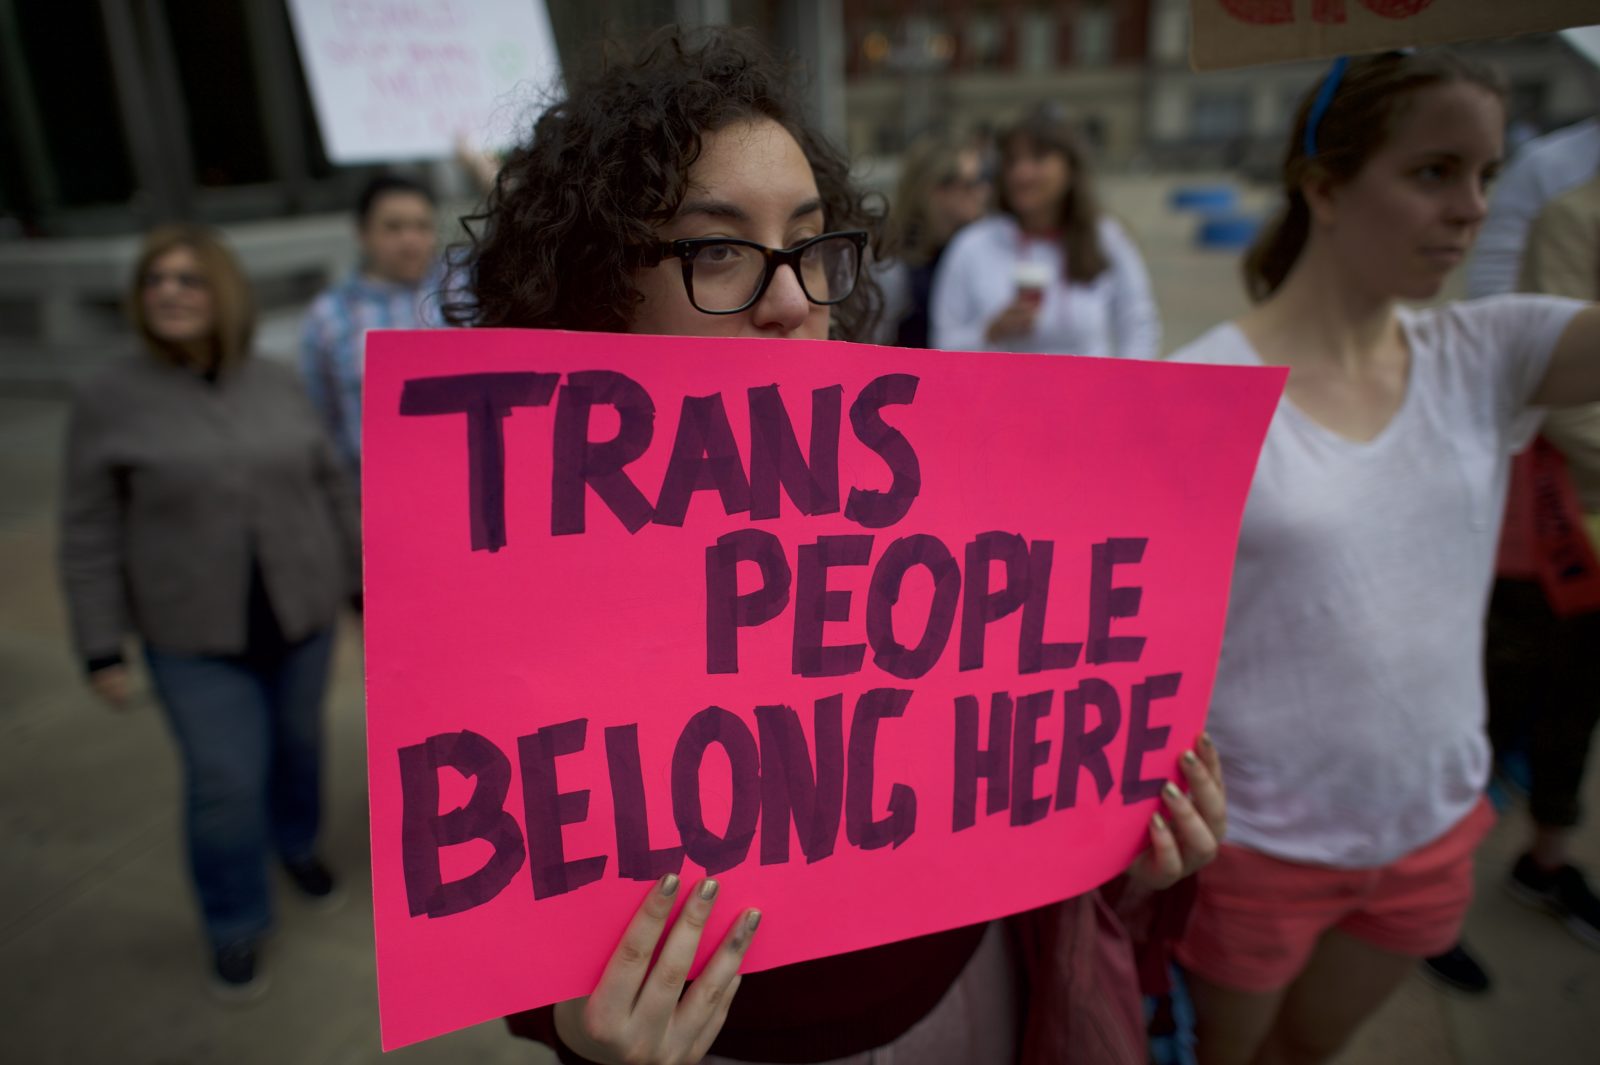 Man Woman Tranny Sex - Shemale: Why you should never use this word to describe trans women |  PinkNews